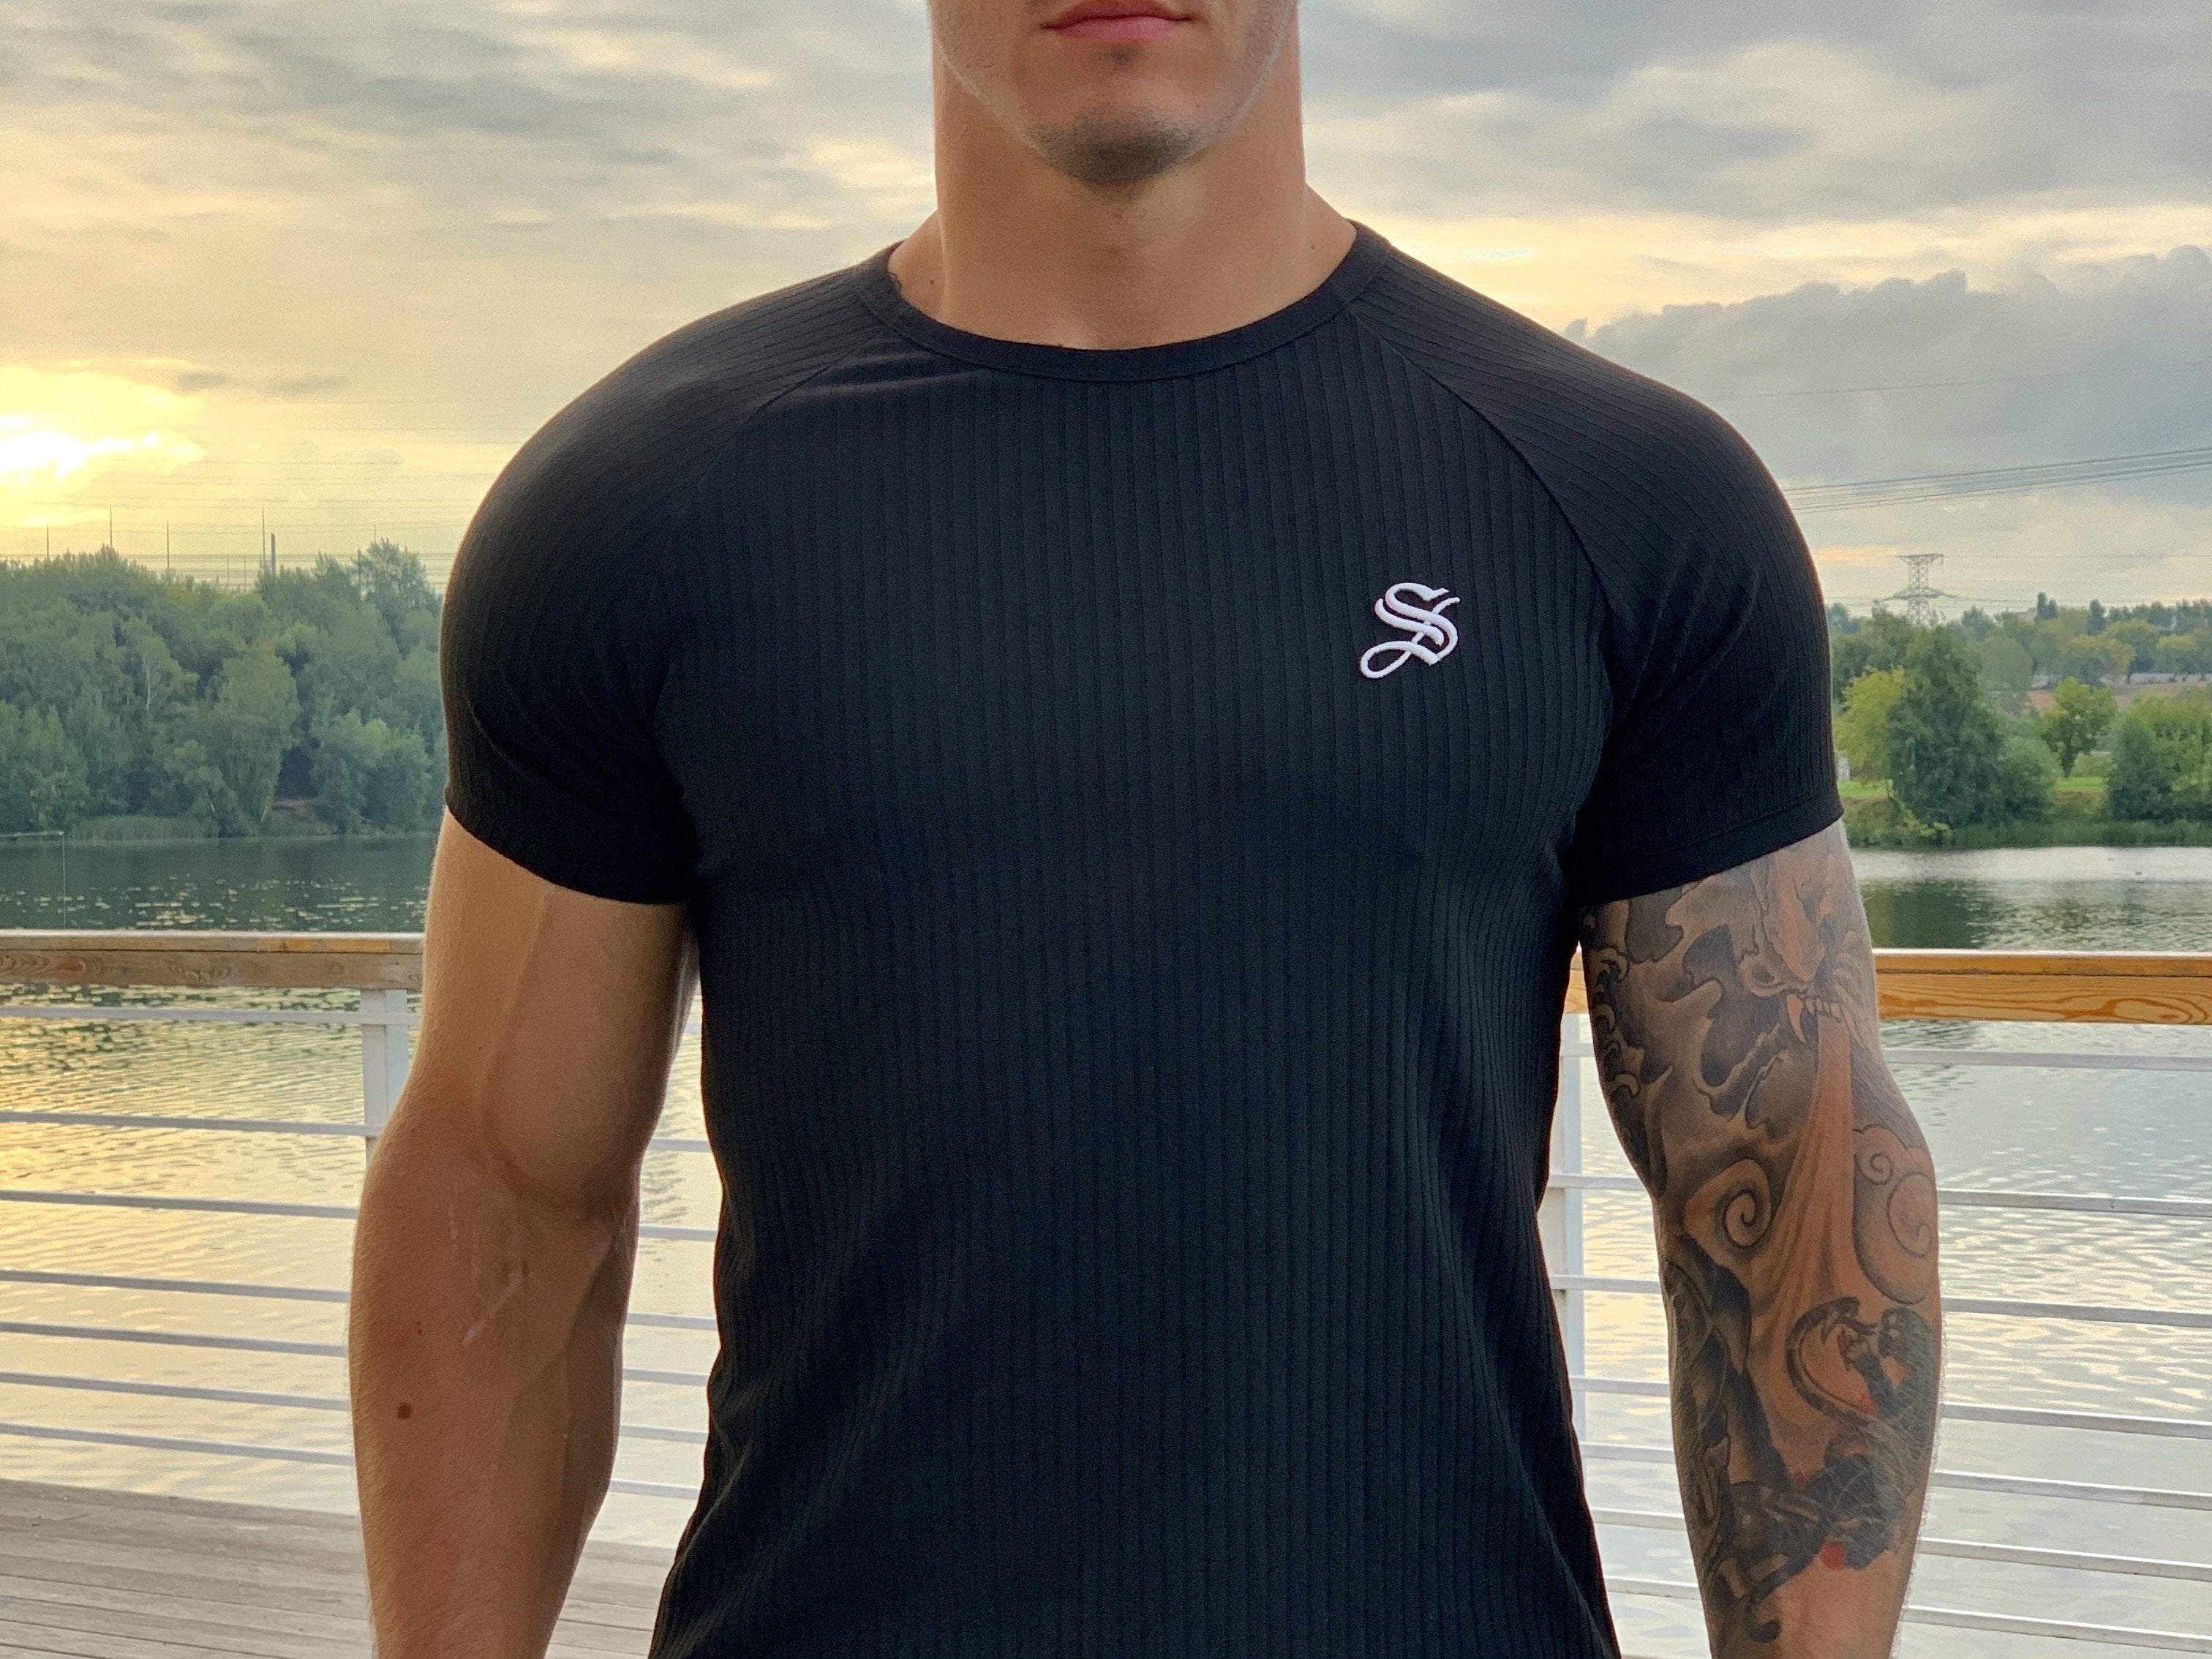 Half Base - Black T-shirt for Men (PRE-ORDER DISPATCH DATE 25 SEPTEMBER) - Sarman Fashion - Wholesale Clothing Fashion Brand for Men from Canada